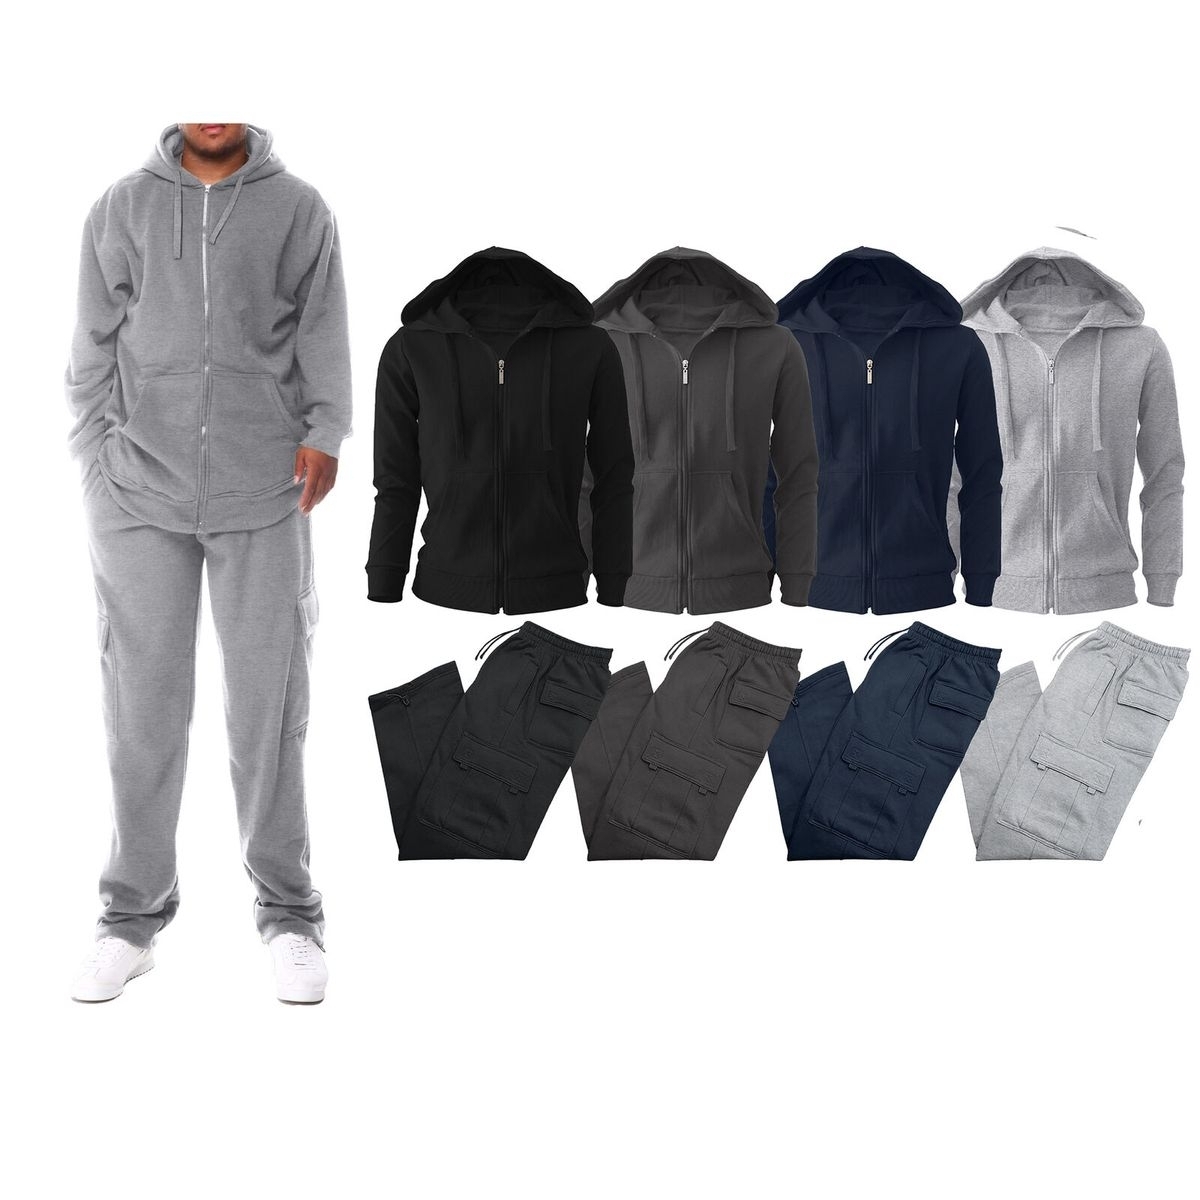 Multi-Pack: Men's Big & Tall Winter Warm Athletic Active Cozy Fleece Lined Multi-Pocket Full Zip Up Cargo Tracksuit - Charcoal, 2-pack, X-la